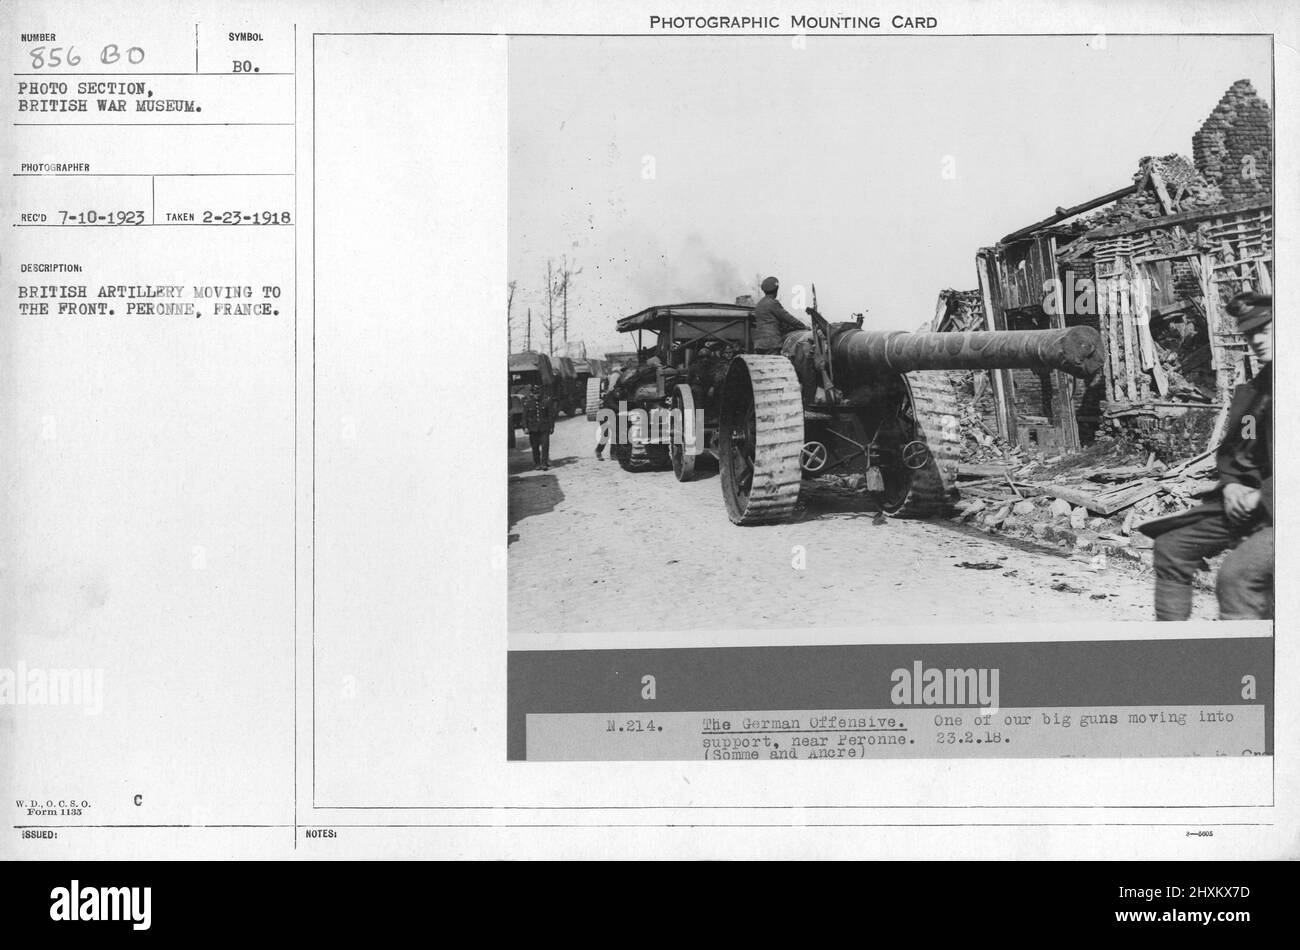 British artillery moving to the front. Peronne, France. 2-23-1918. Collection of World War I Photographs, 1914-1918 that depict the military activities of British and other nation's armed forces and personnel during World War I. Stock Photo